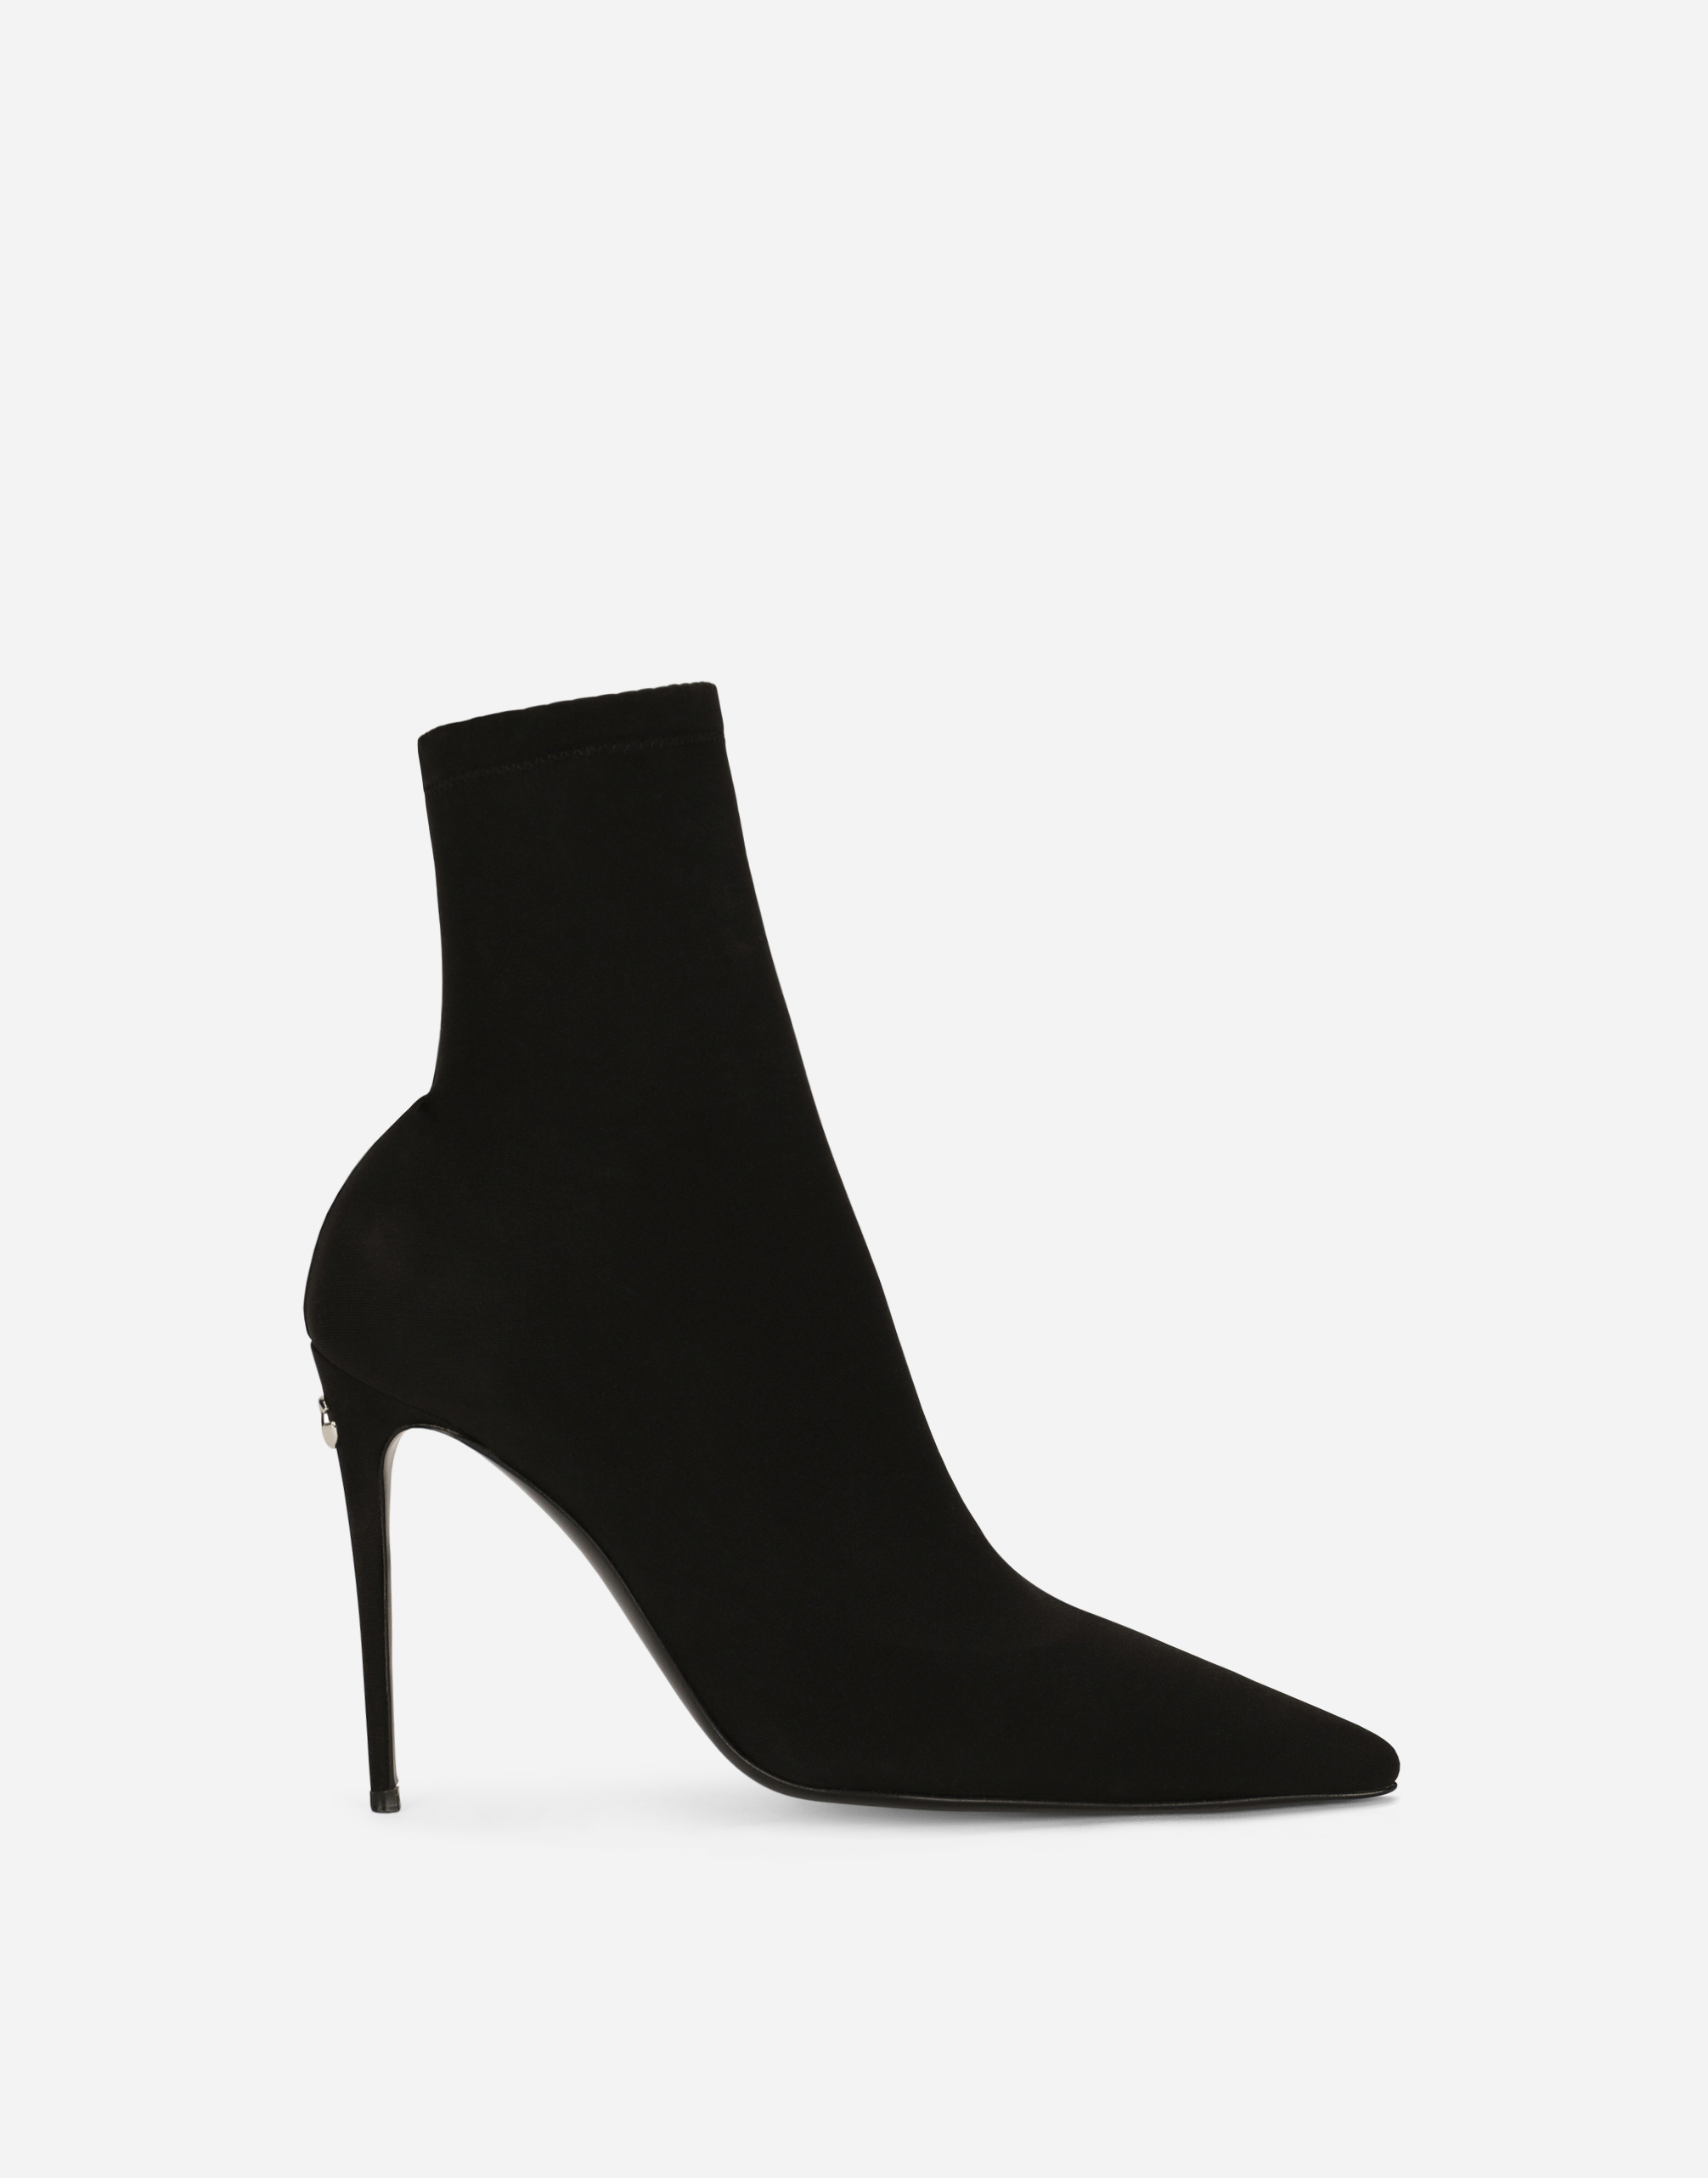 KIM DOLCE&GABBANA Stretch jersey ankle boots in Black